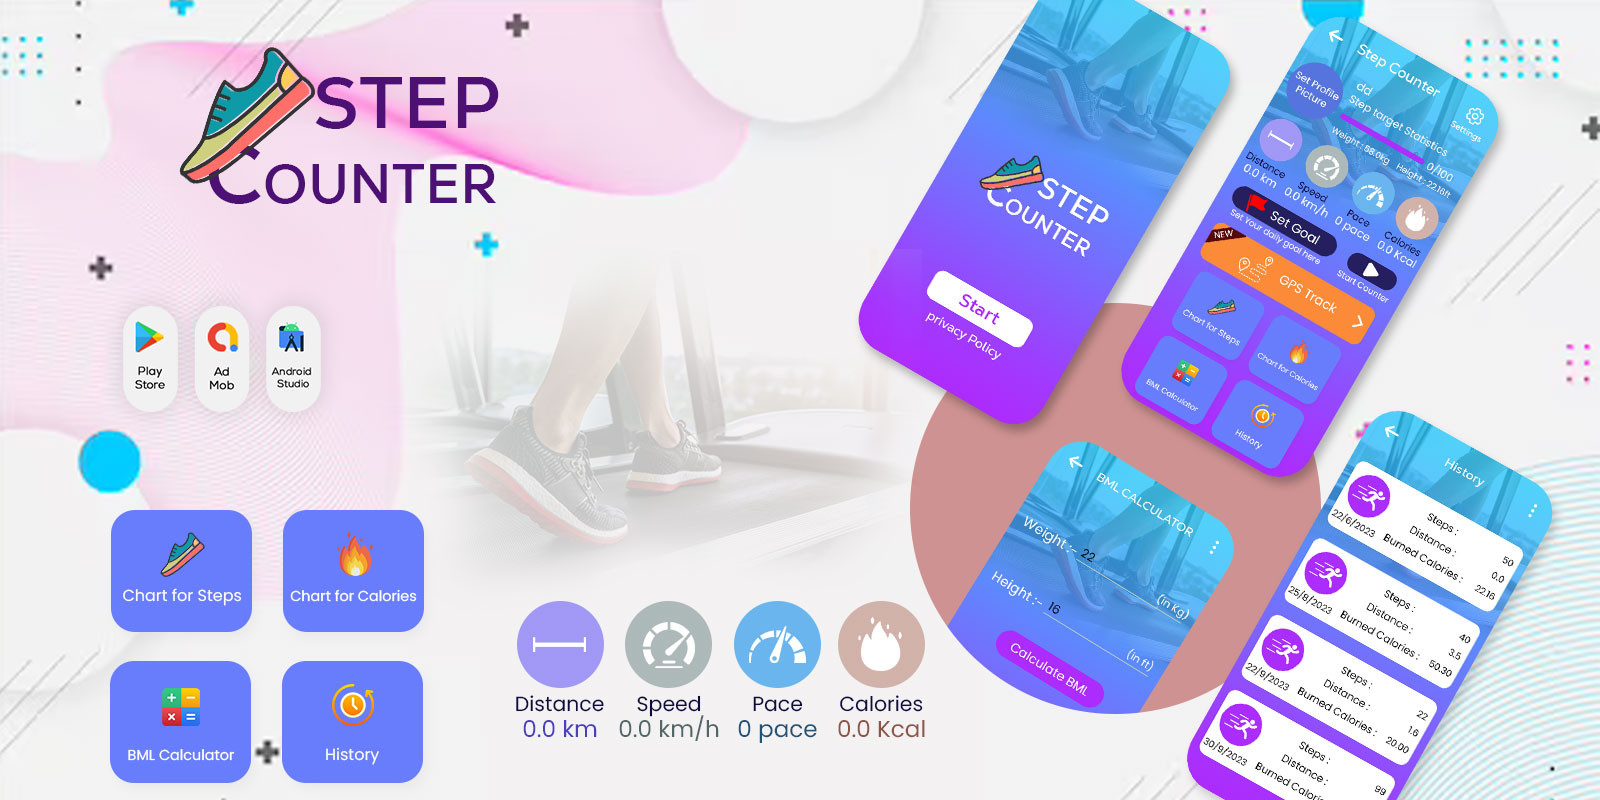 More information about "Step Counter - Pedometer - Android"